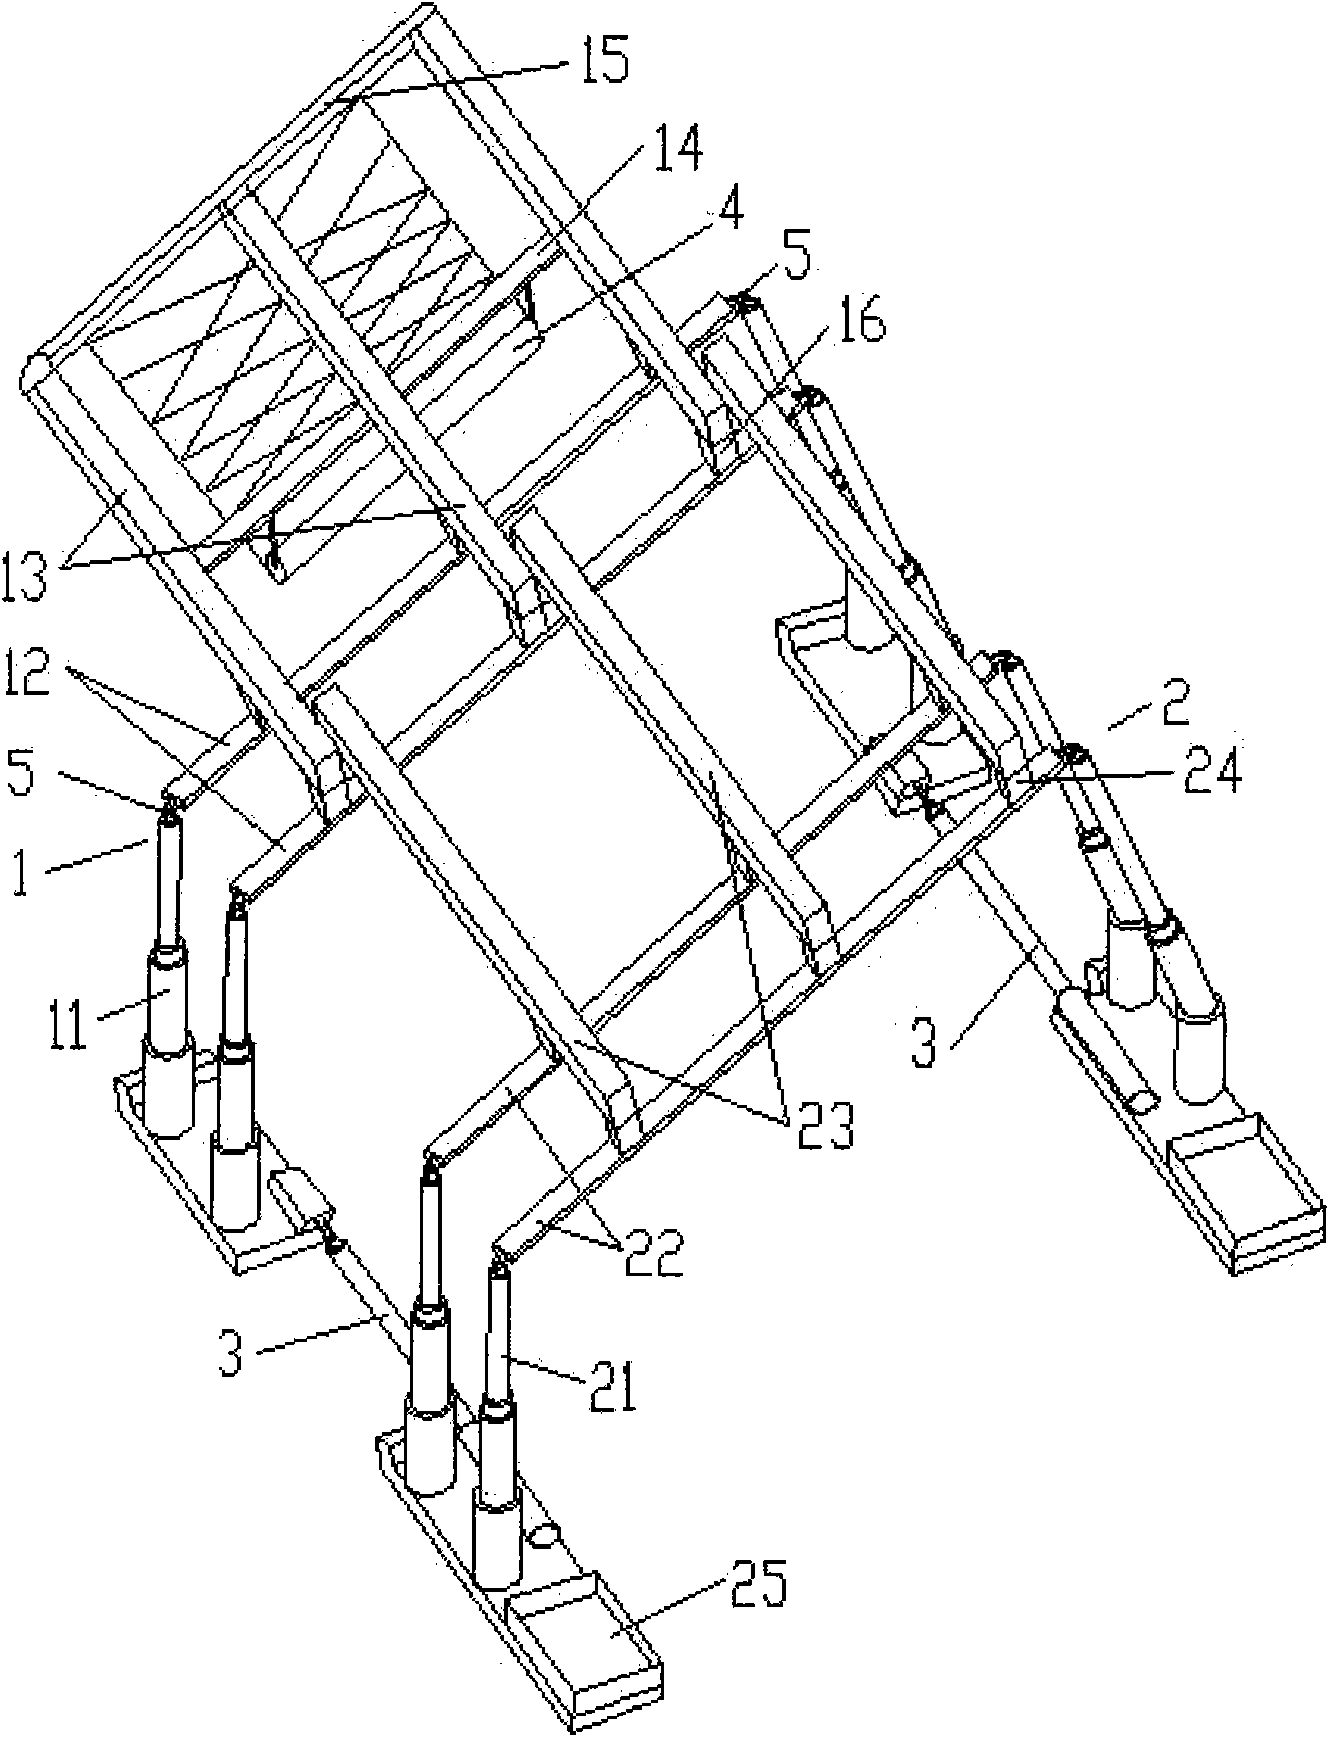 Coal roadway rapid excavation temporary supporting system and supporting method applying same